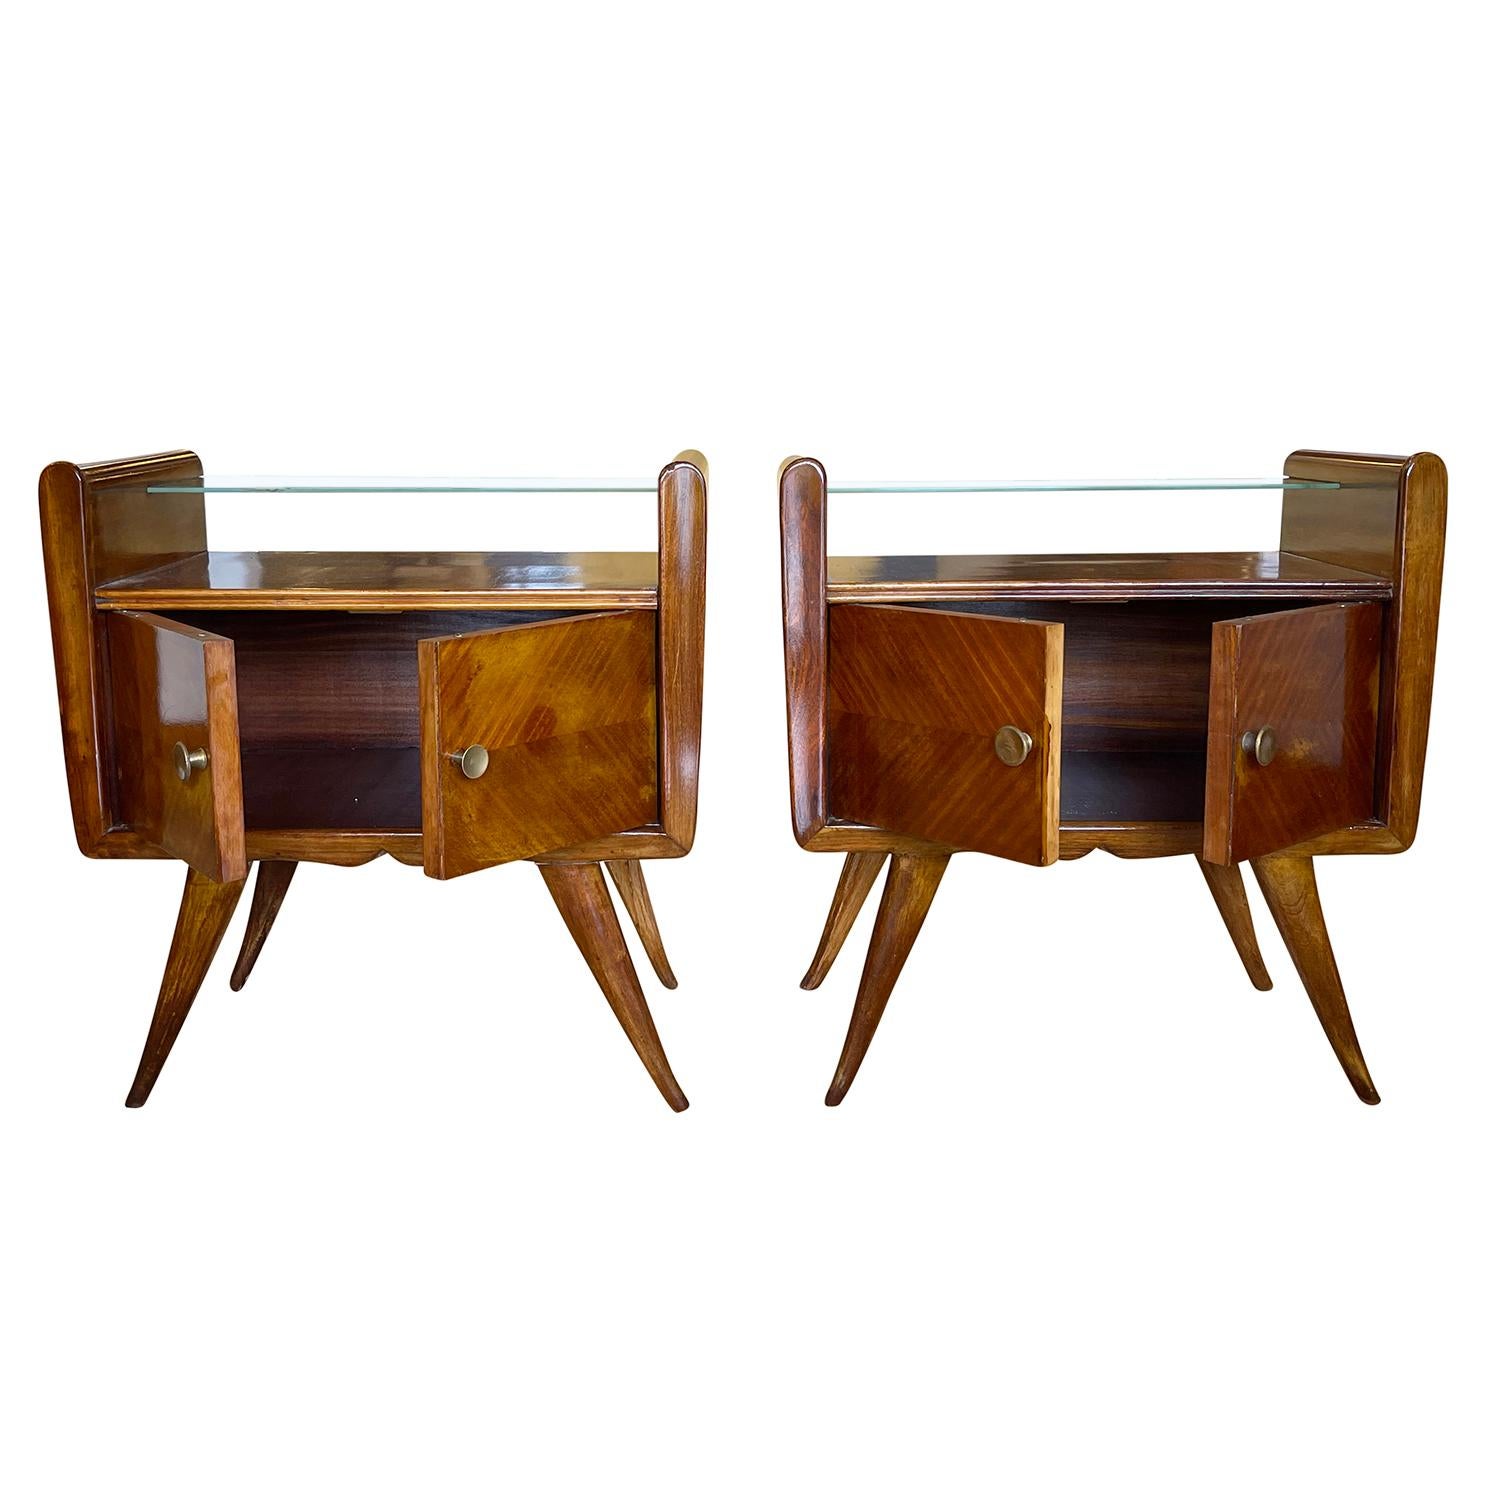 A vintage Mid-Century Modern Italian pair of nightstands made of hand carved walnut with slotted clear glass half shelf, composed with two cabinet doors and one varied, brass door pull, in matched veneers. The bedside tables are standing on four